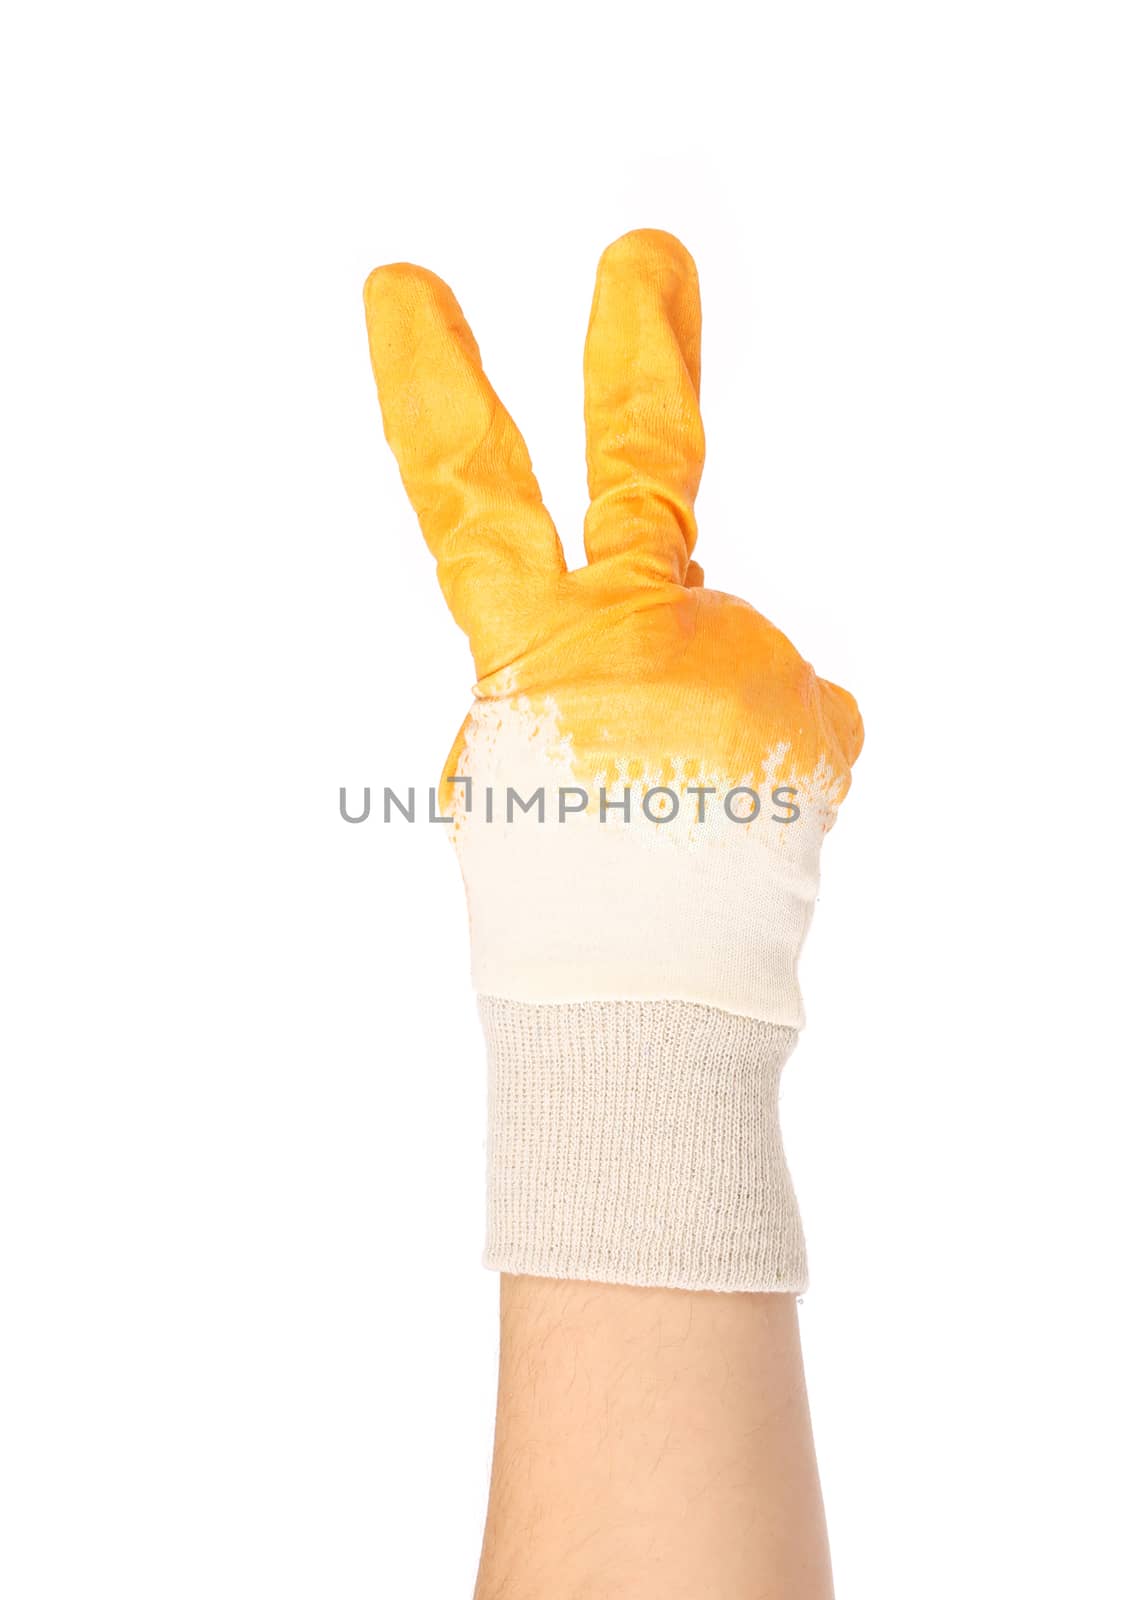 Hand in rubber glove shows two. by indigolotos